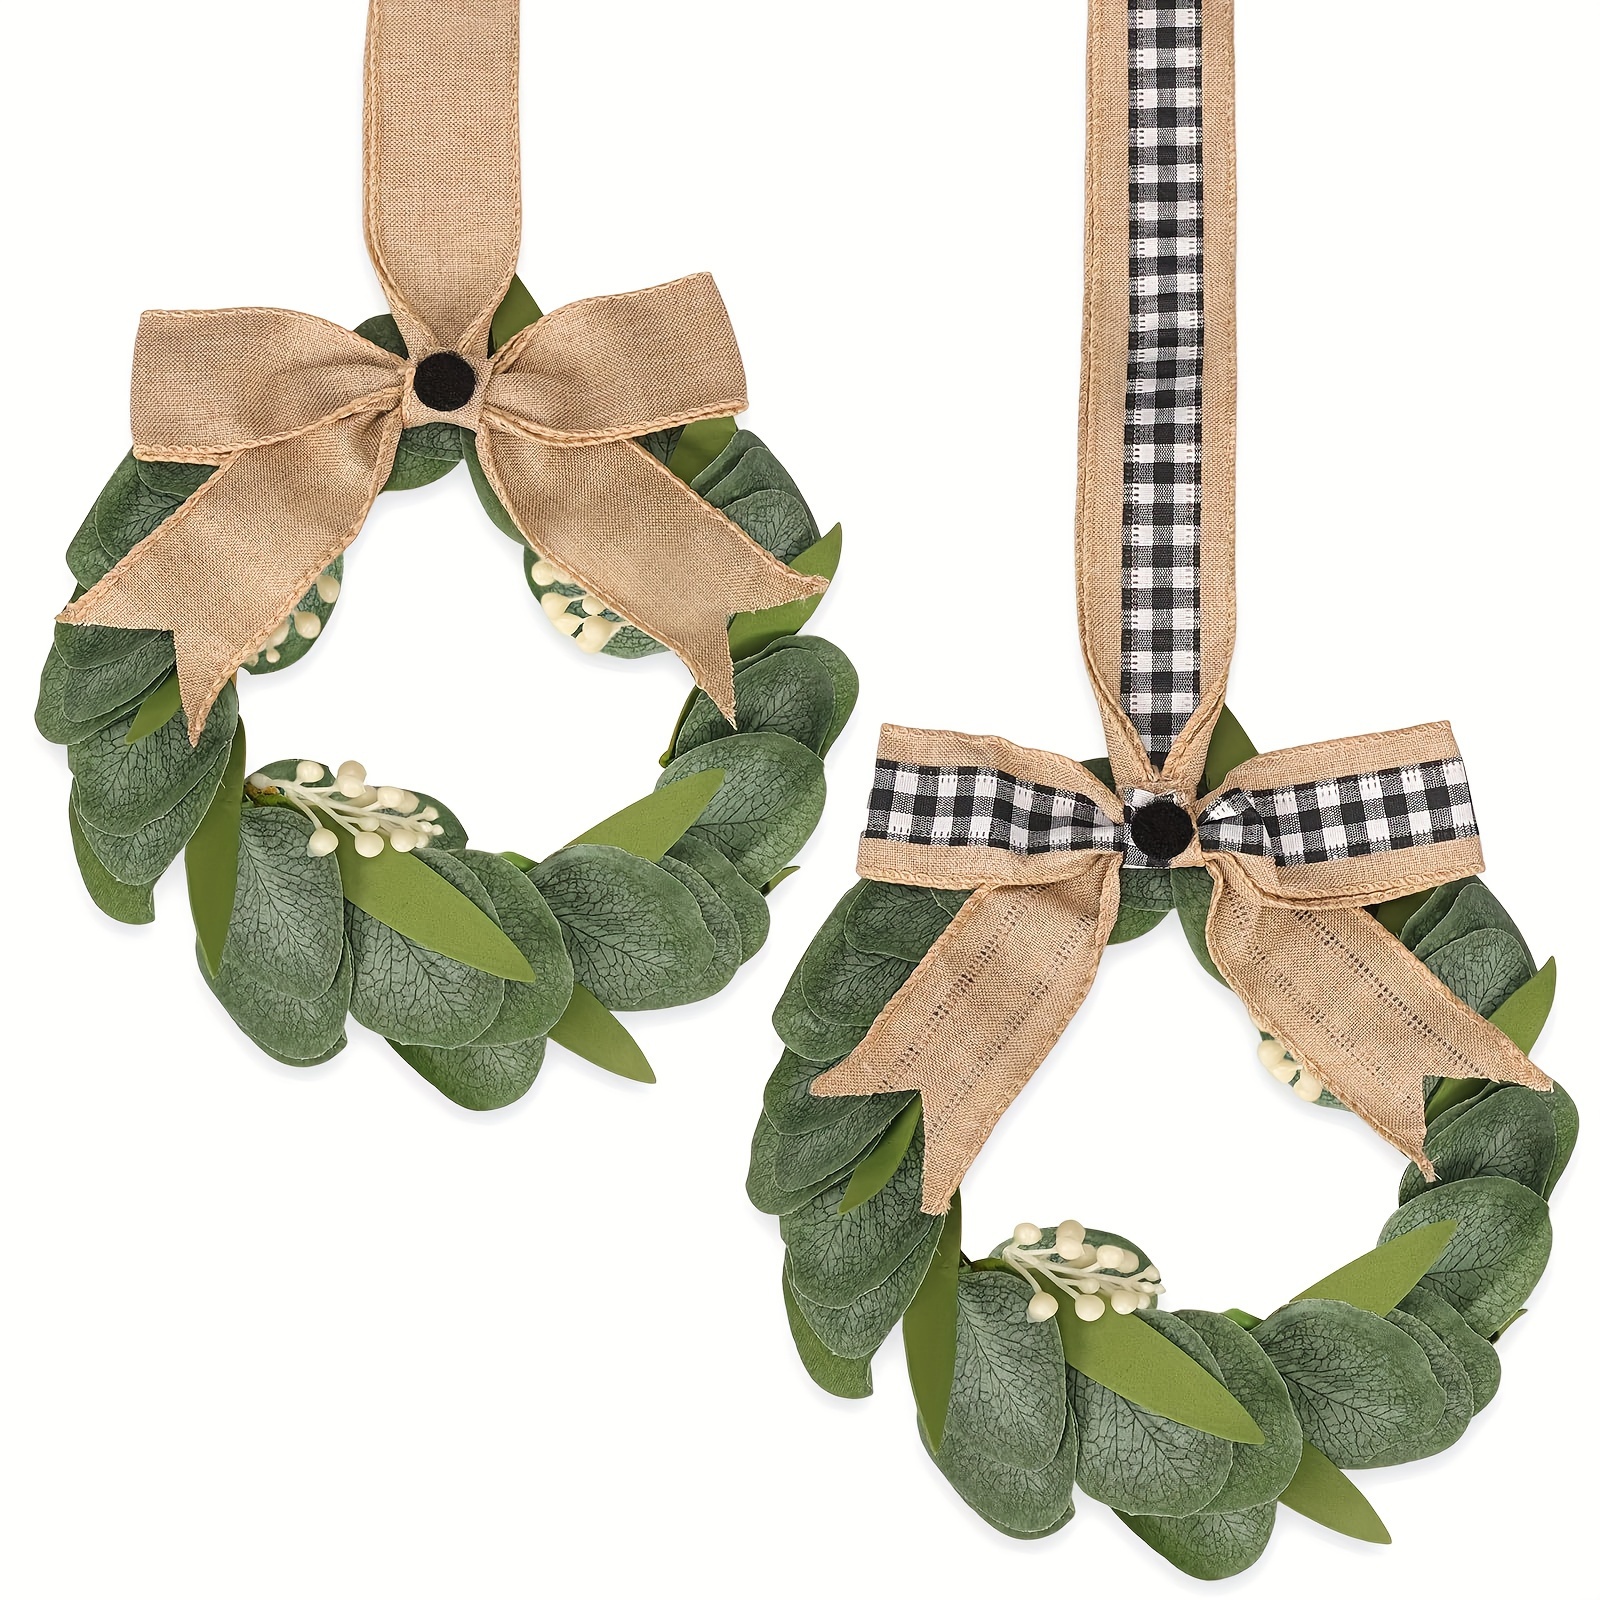  2 Pcs 13.7 Inch Eucalyptus Wreath Small Greenery Wreath Faux  Kitchen Cabinet Wreaths for Front Door Farmhouse Wall Decor(Plaid Bow  Style) : Home & Kitchen